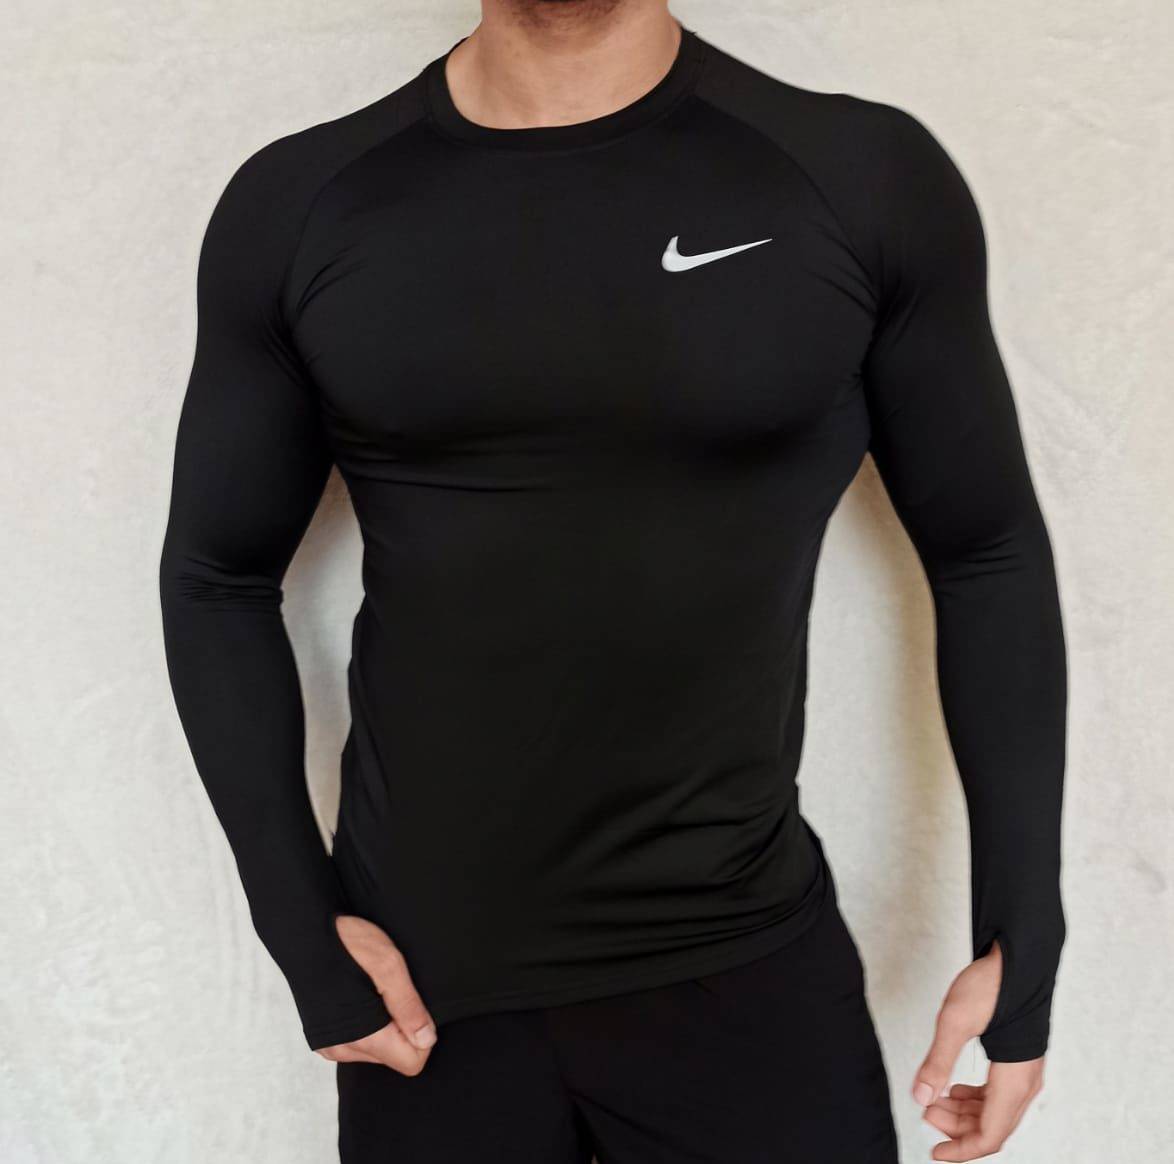 clue Moss wing Nike Pro Compression Long Sleeve Black – with fingers – Abdalla Store